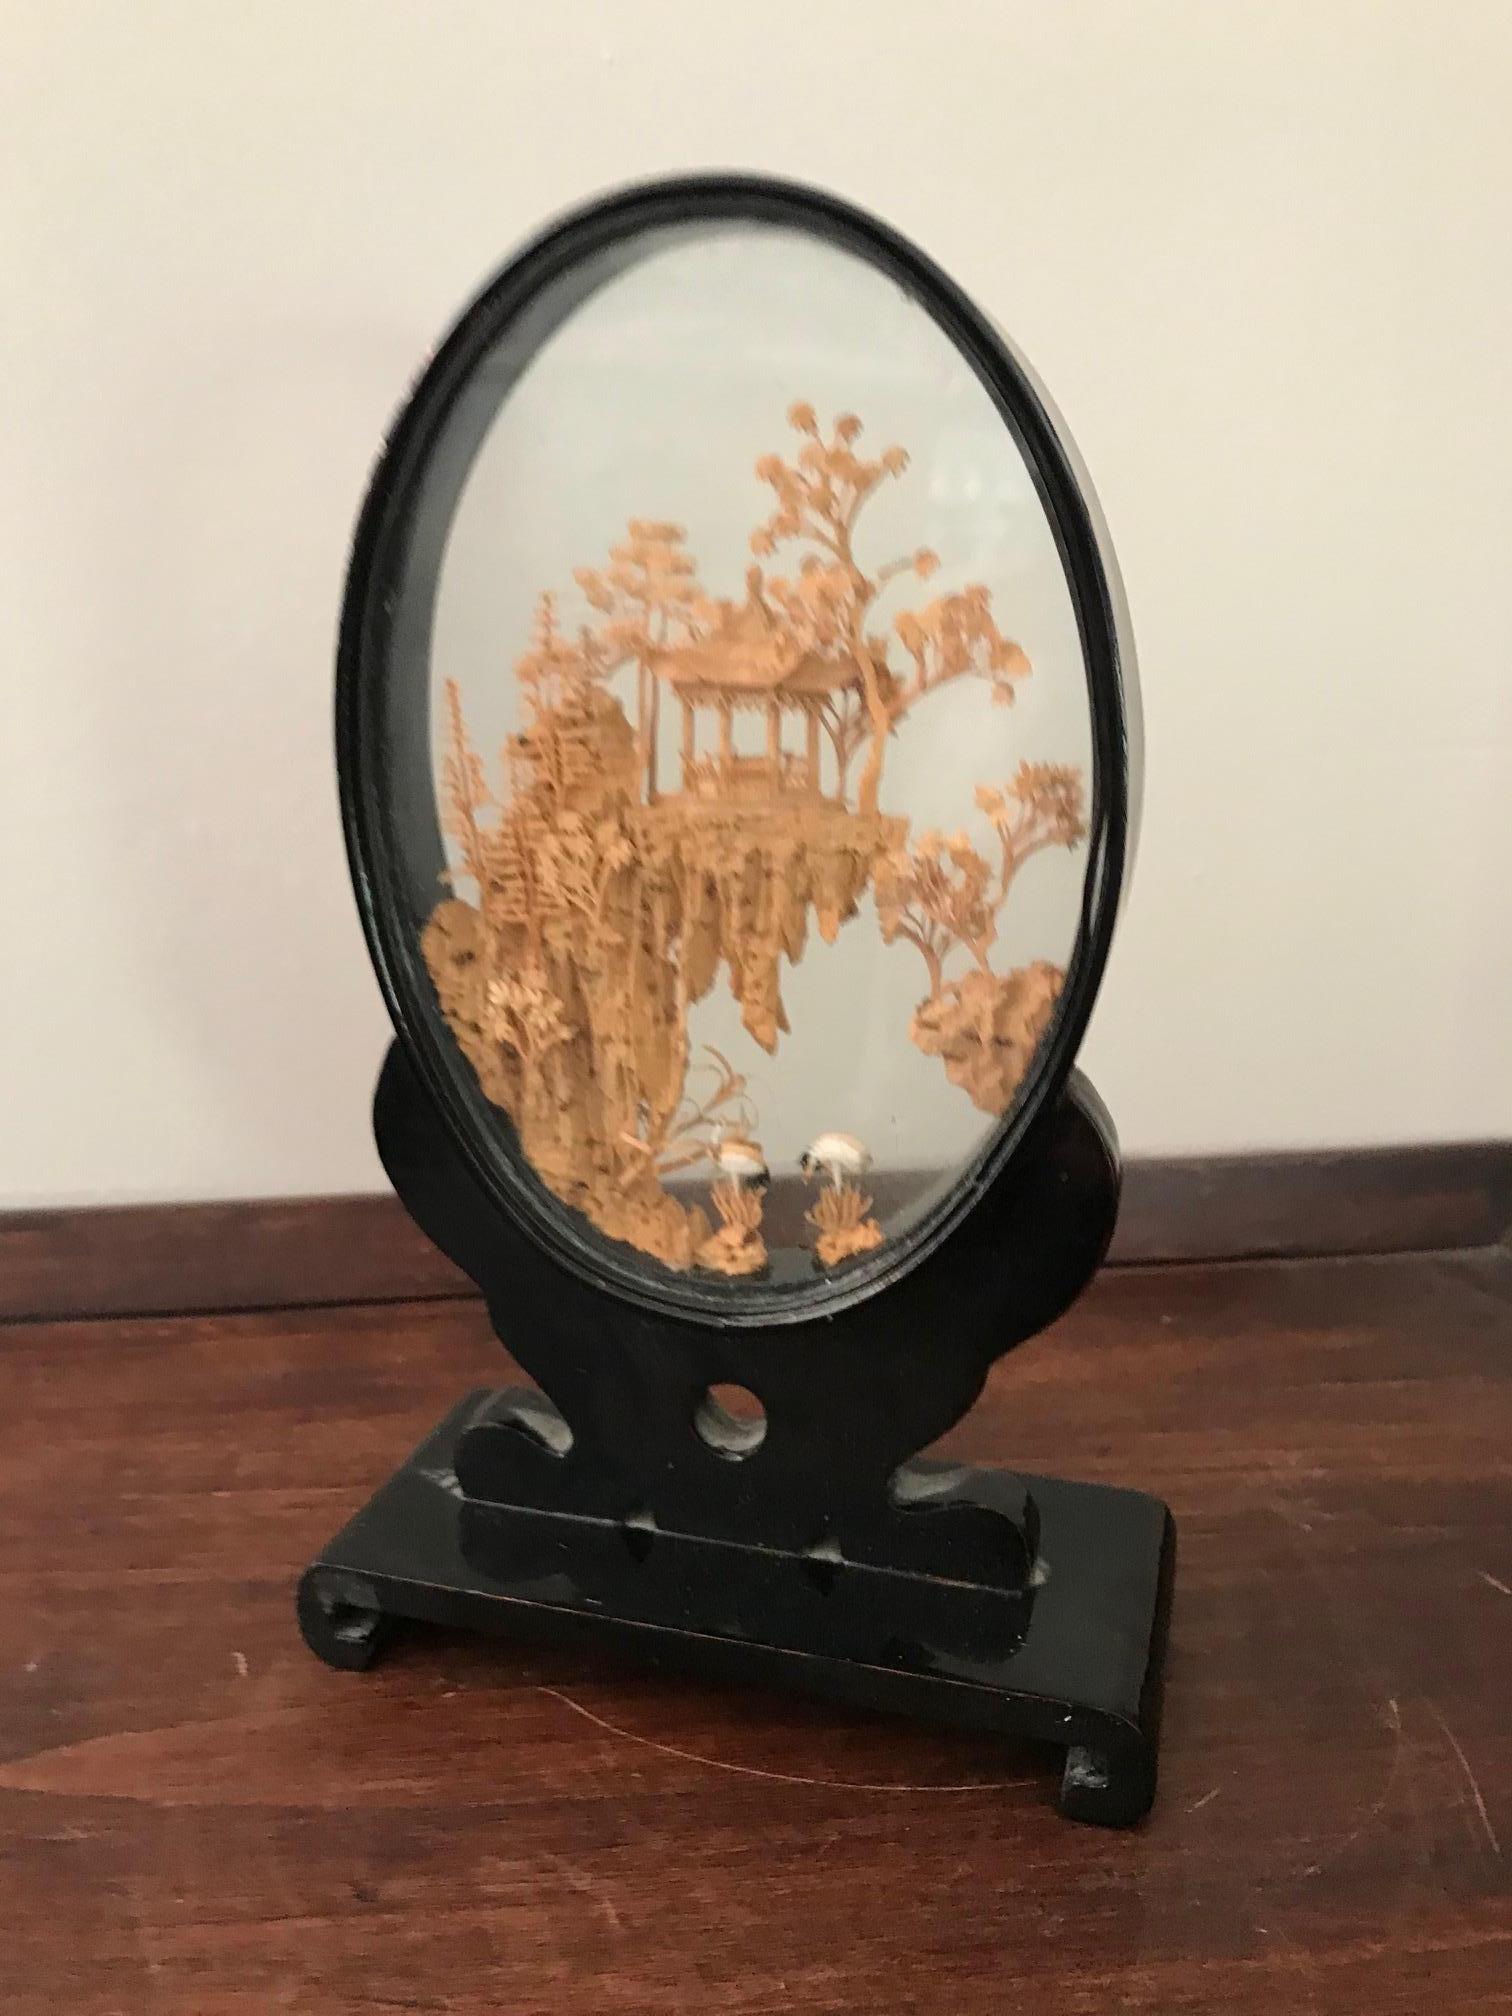 Chinese diorama made of vintage cork in glass and lacquered wood.
Finely carved decoration in its glass case and brown lacquered base.
Careful and delicate work of miniature sculpture, representing a Chinese landscape view, a pagoda in a